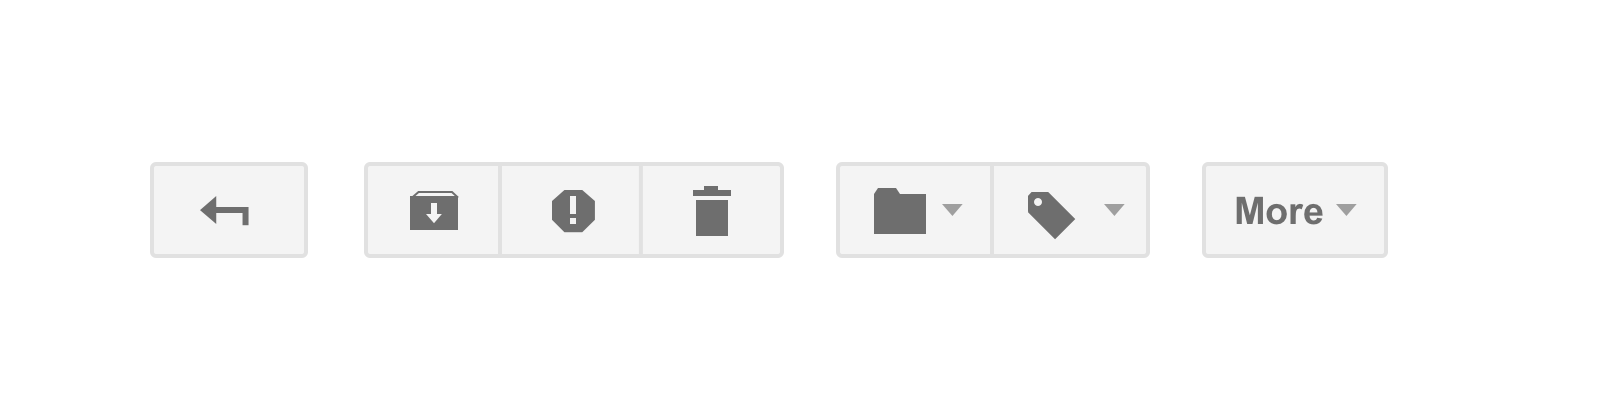 gmail-icons-only.png